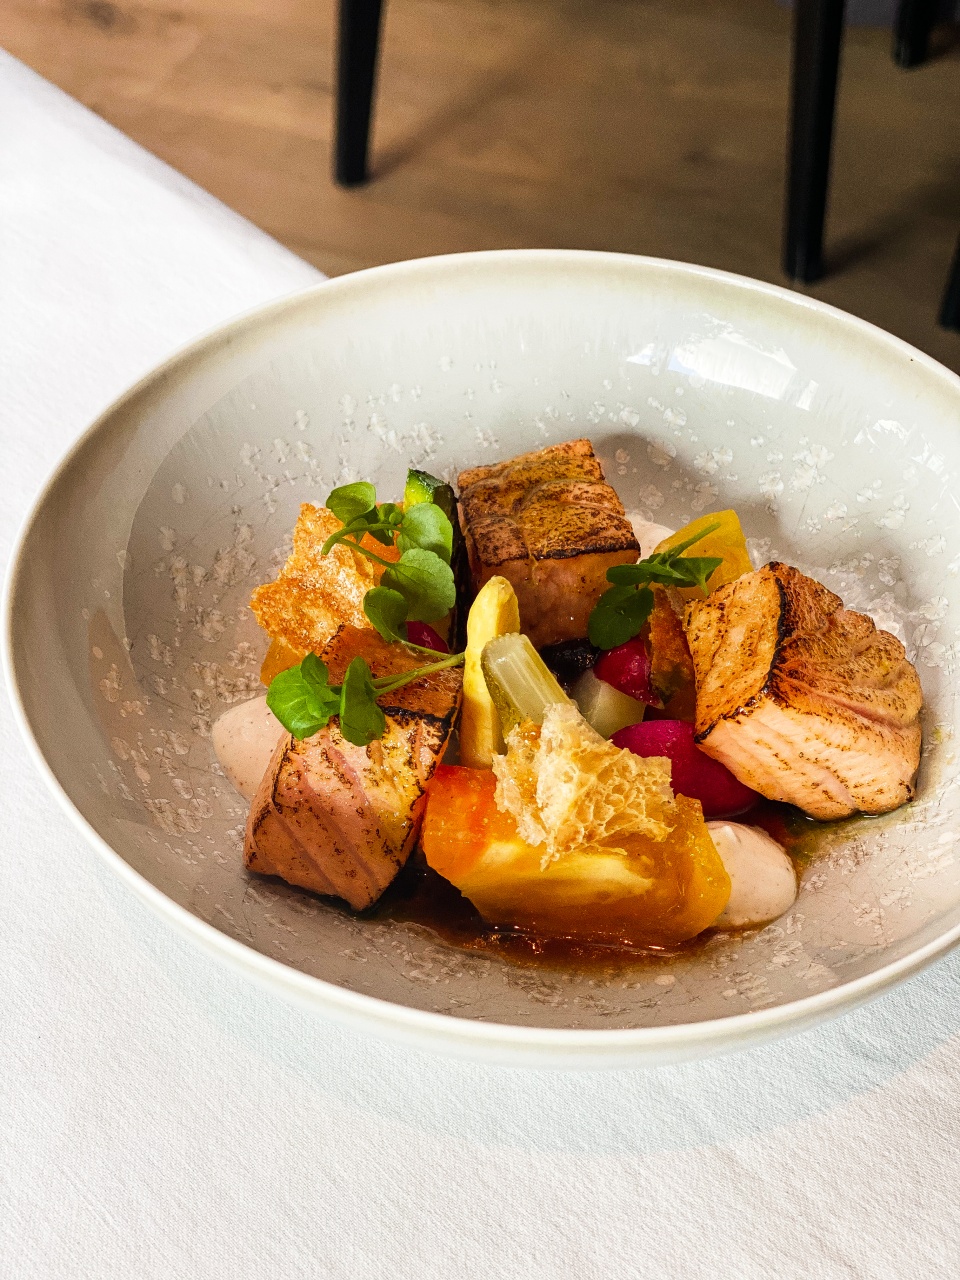 An artistically presented dish of marinated and grilled wild salmon, accompanied by fresh tomato, avocado and radishes, served on a modern plate at De Bakermat restaurant.